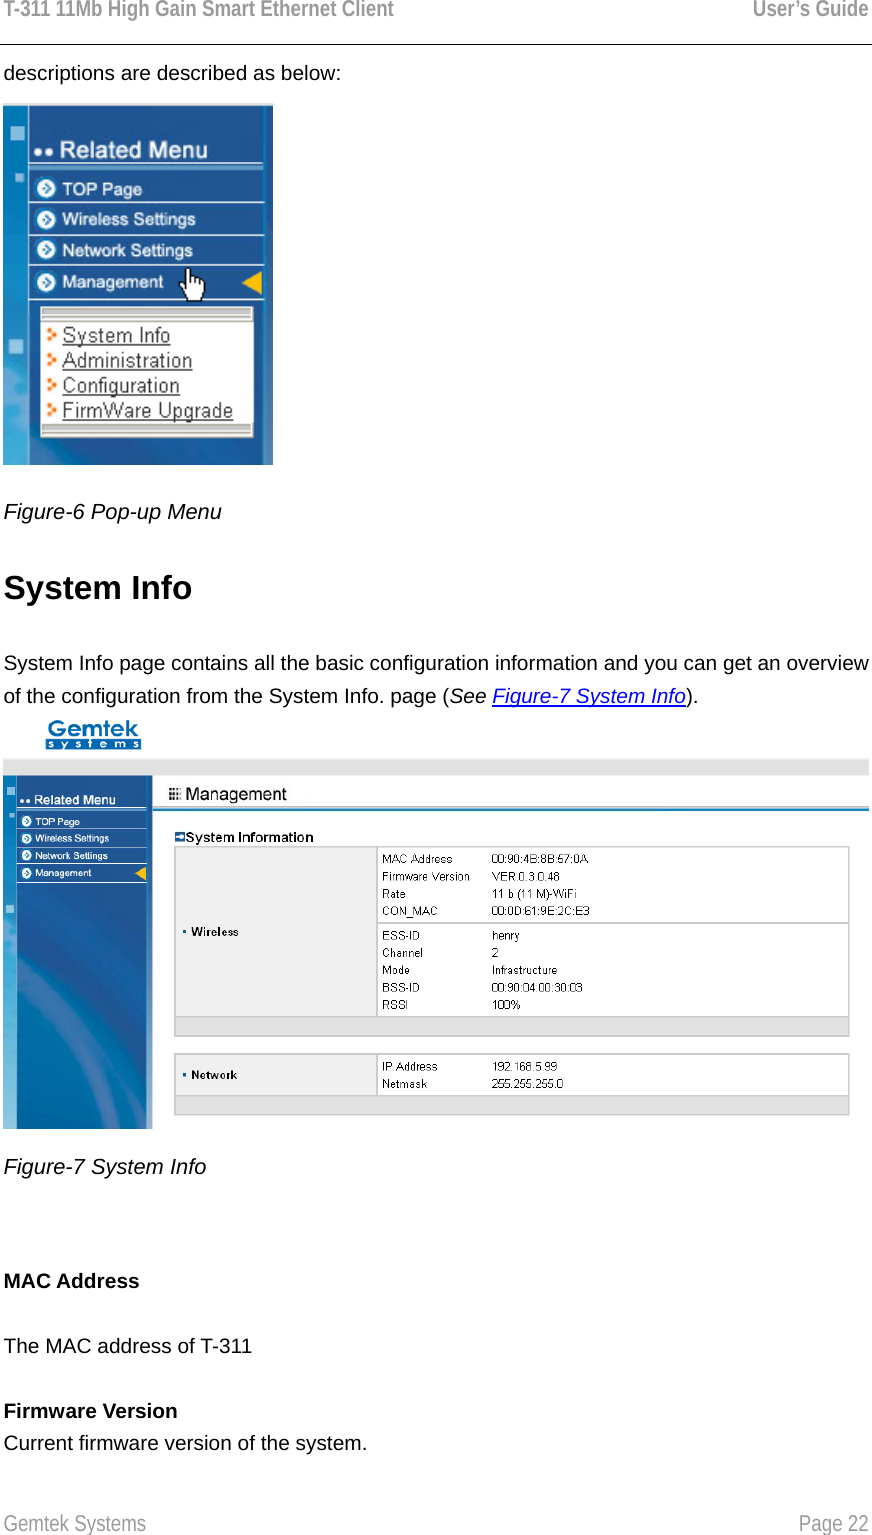 T-311 11Mb High Gain Smart Ethernet Client    User’s Guide  Gemtek Systems    Page 22  descriptions are described as below:  Figure-6 Pop-up Menu System Info System Info page contains all the basic configuration information and you can get an overview of the configuration from the System Info. page (See Figure-7 System Info).   Figure-7 System Info    MAC Address The MAC address of T-311  Firmware Version   Current firmware version of the system.  